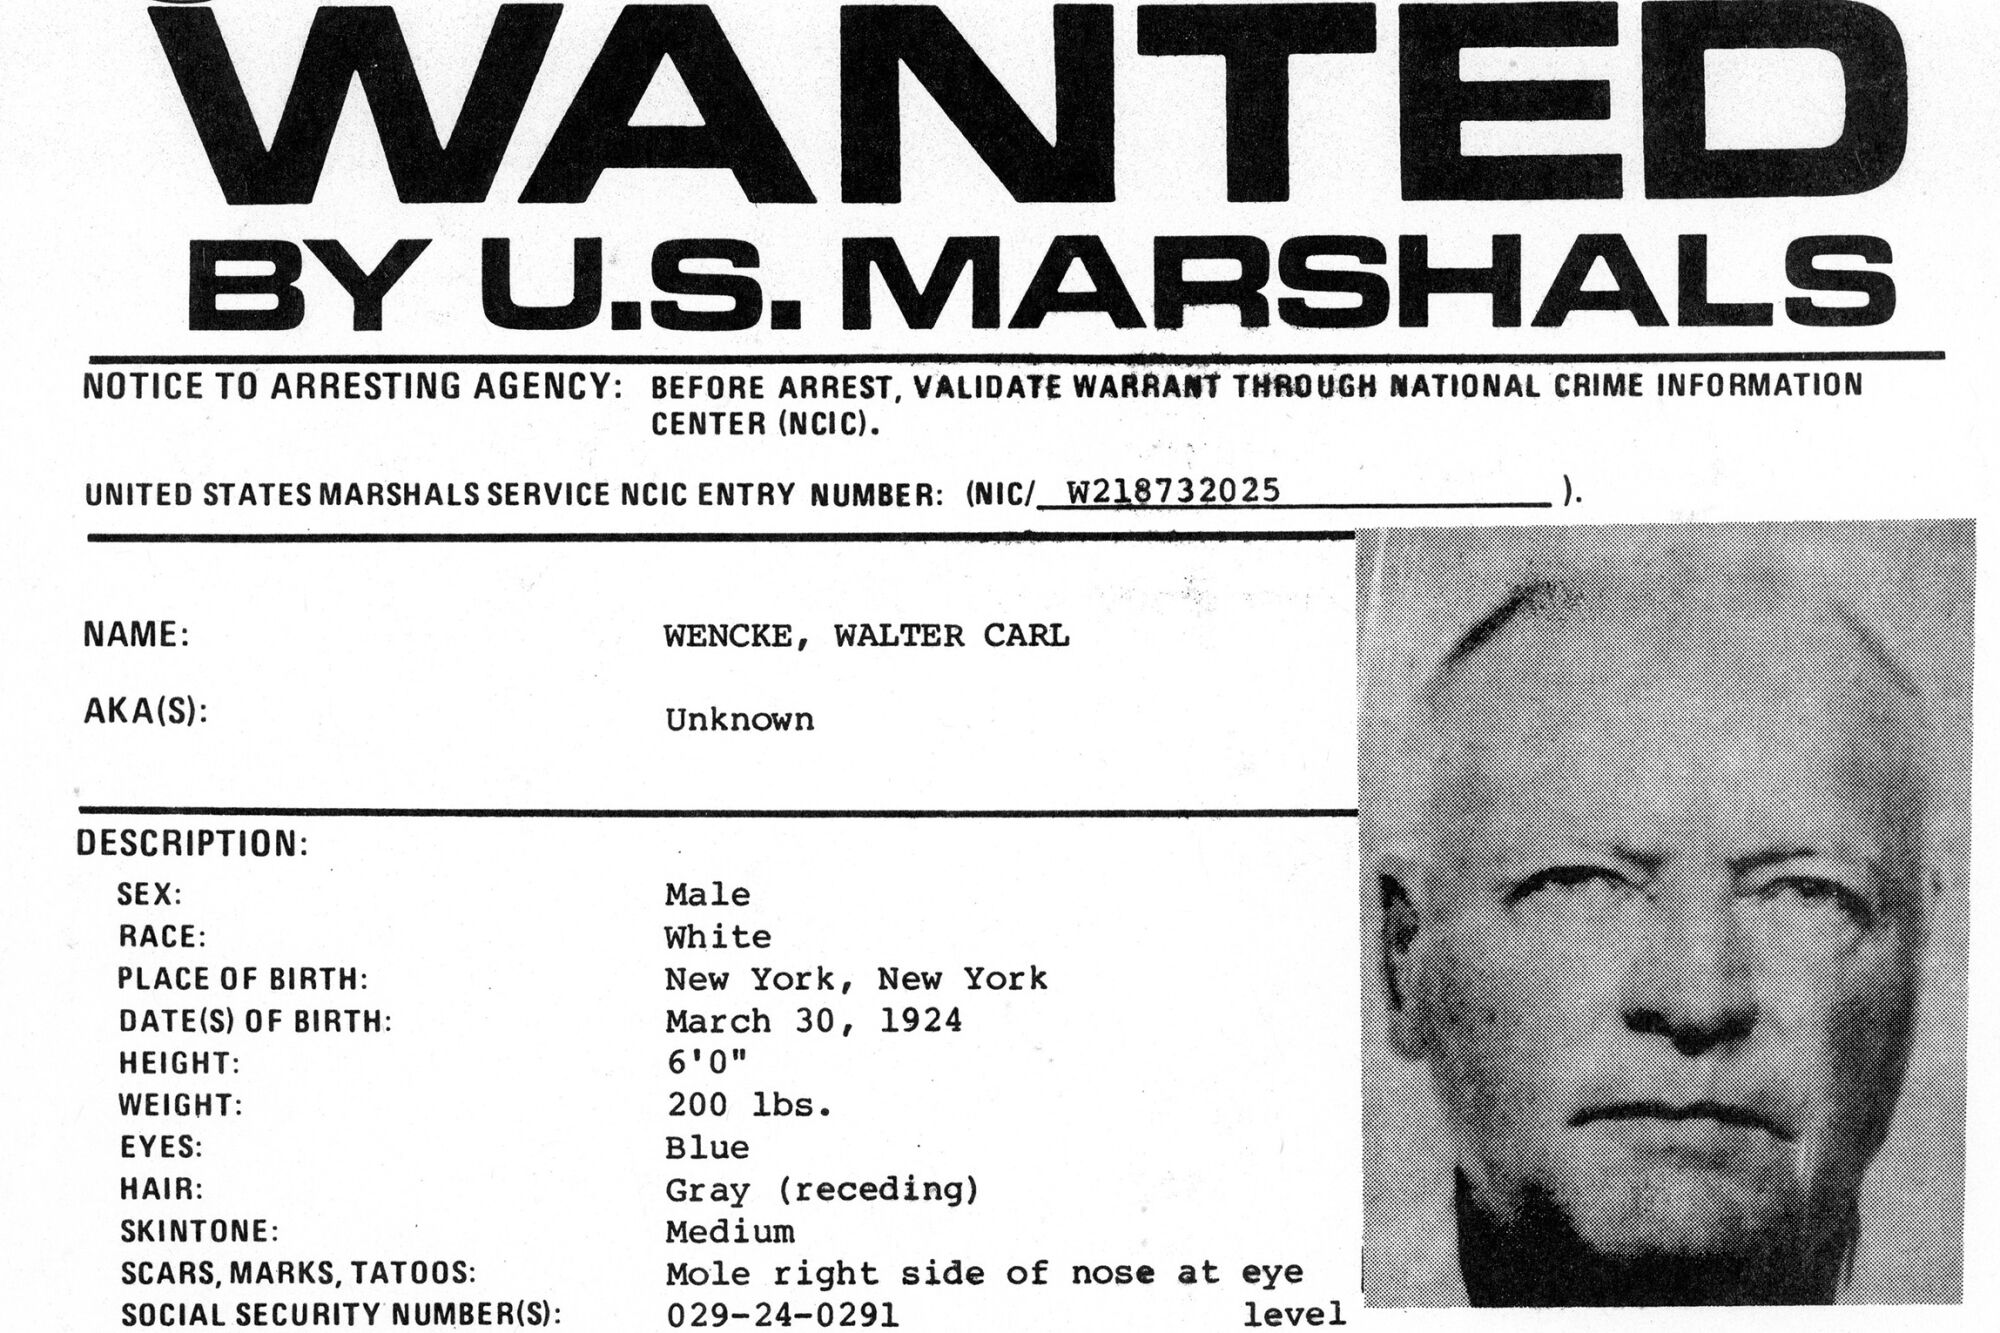 Copy of a U.S. Marshals Service wanted poster for Walter Wencke, who fled in 1979 and has never been found.